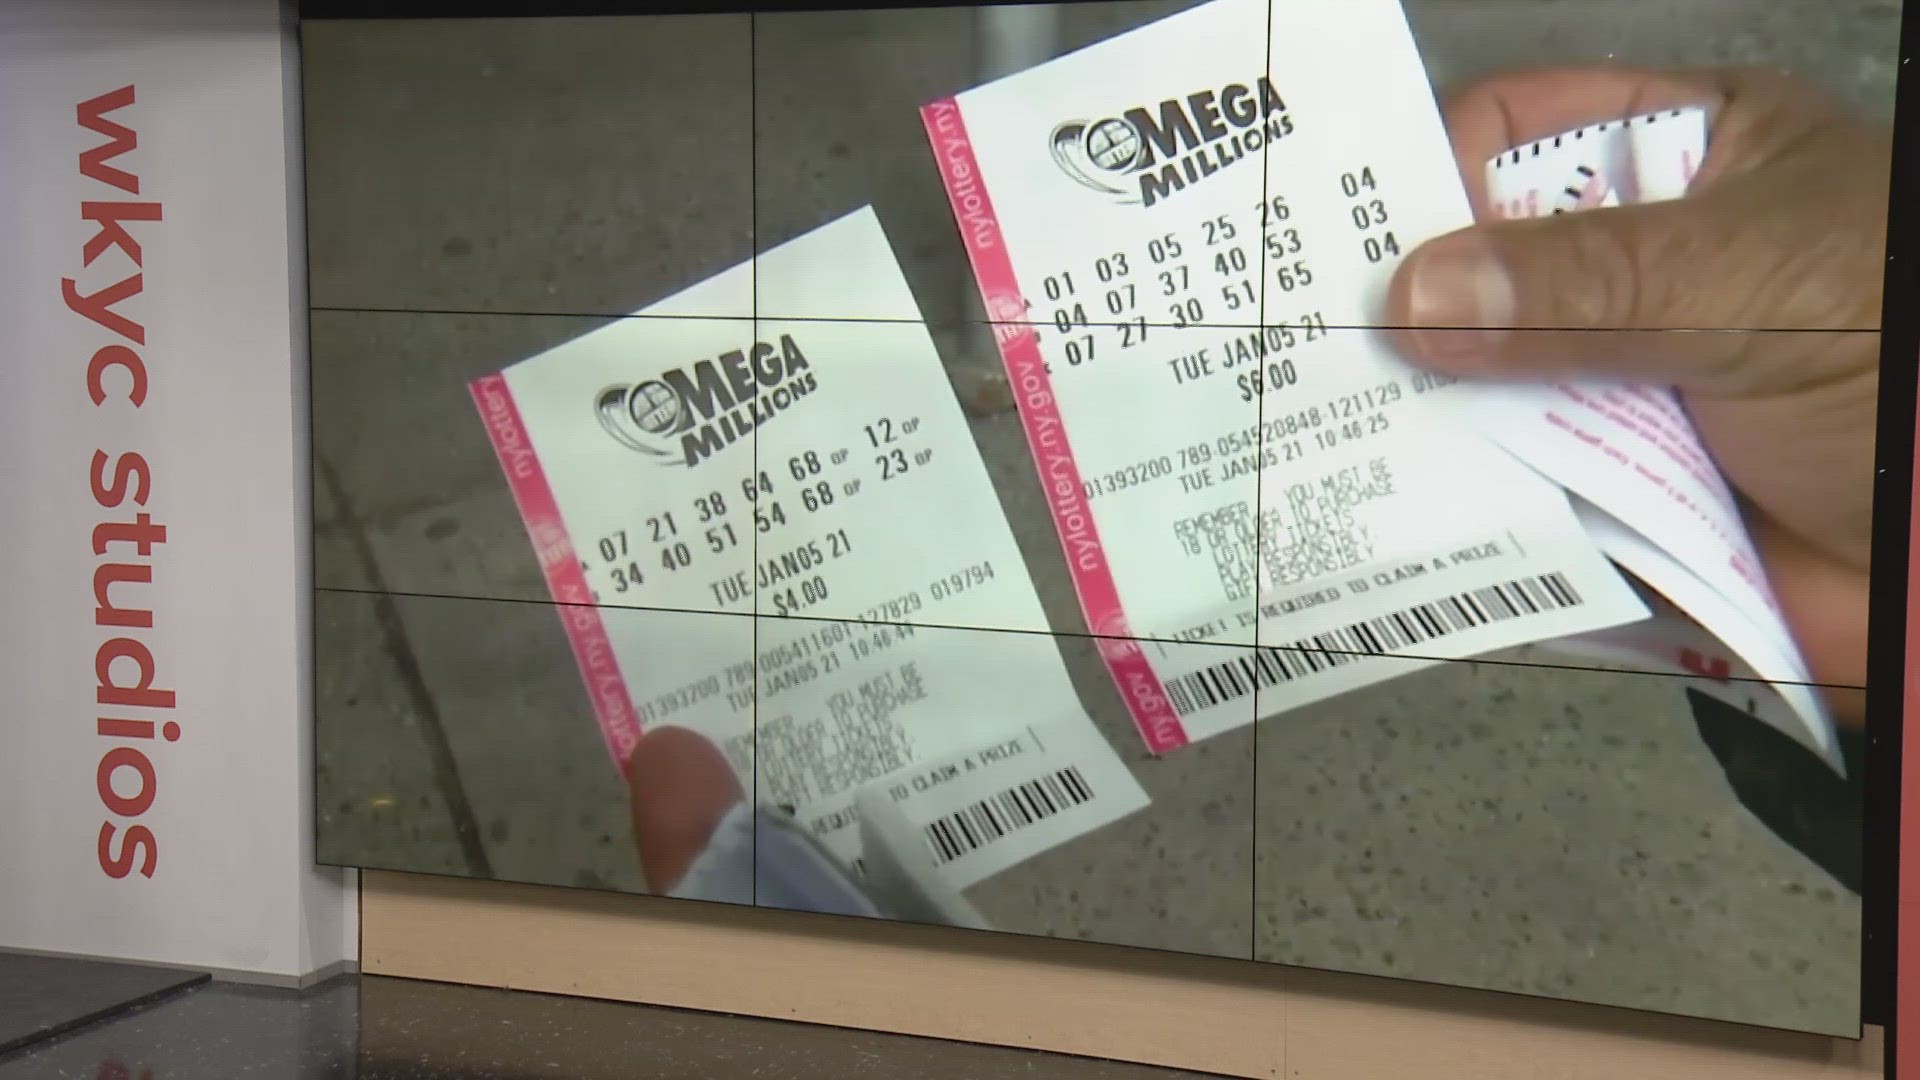 The Mega Millions jackpot now climbs to $560 million, which features a cash option worth $281.1 million for the next drawing on Friday, July 14.